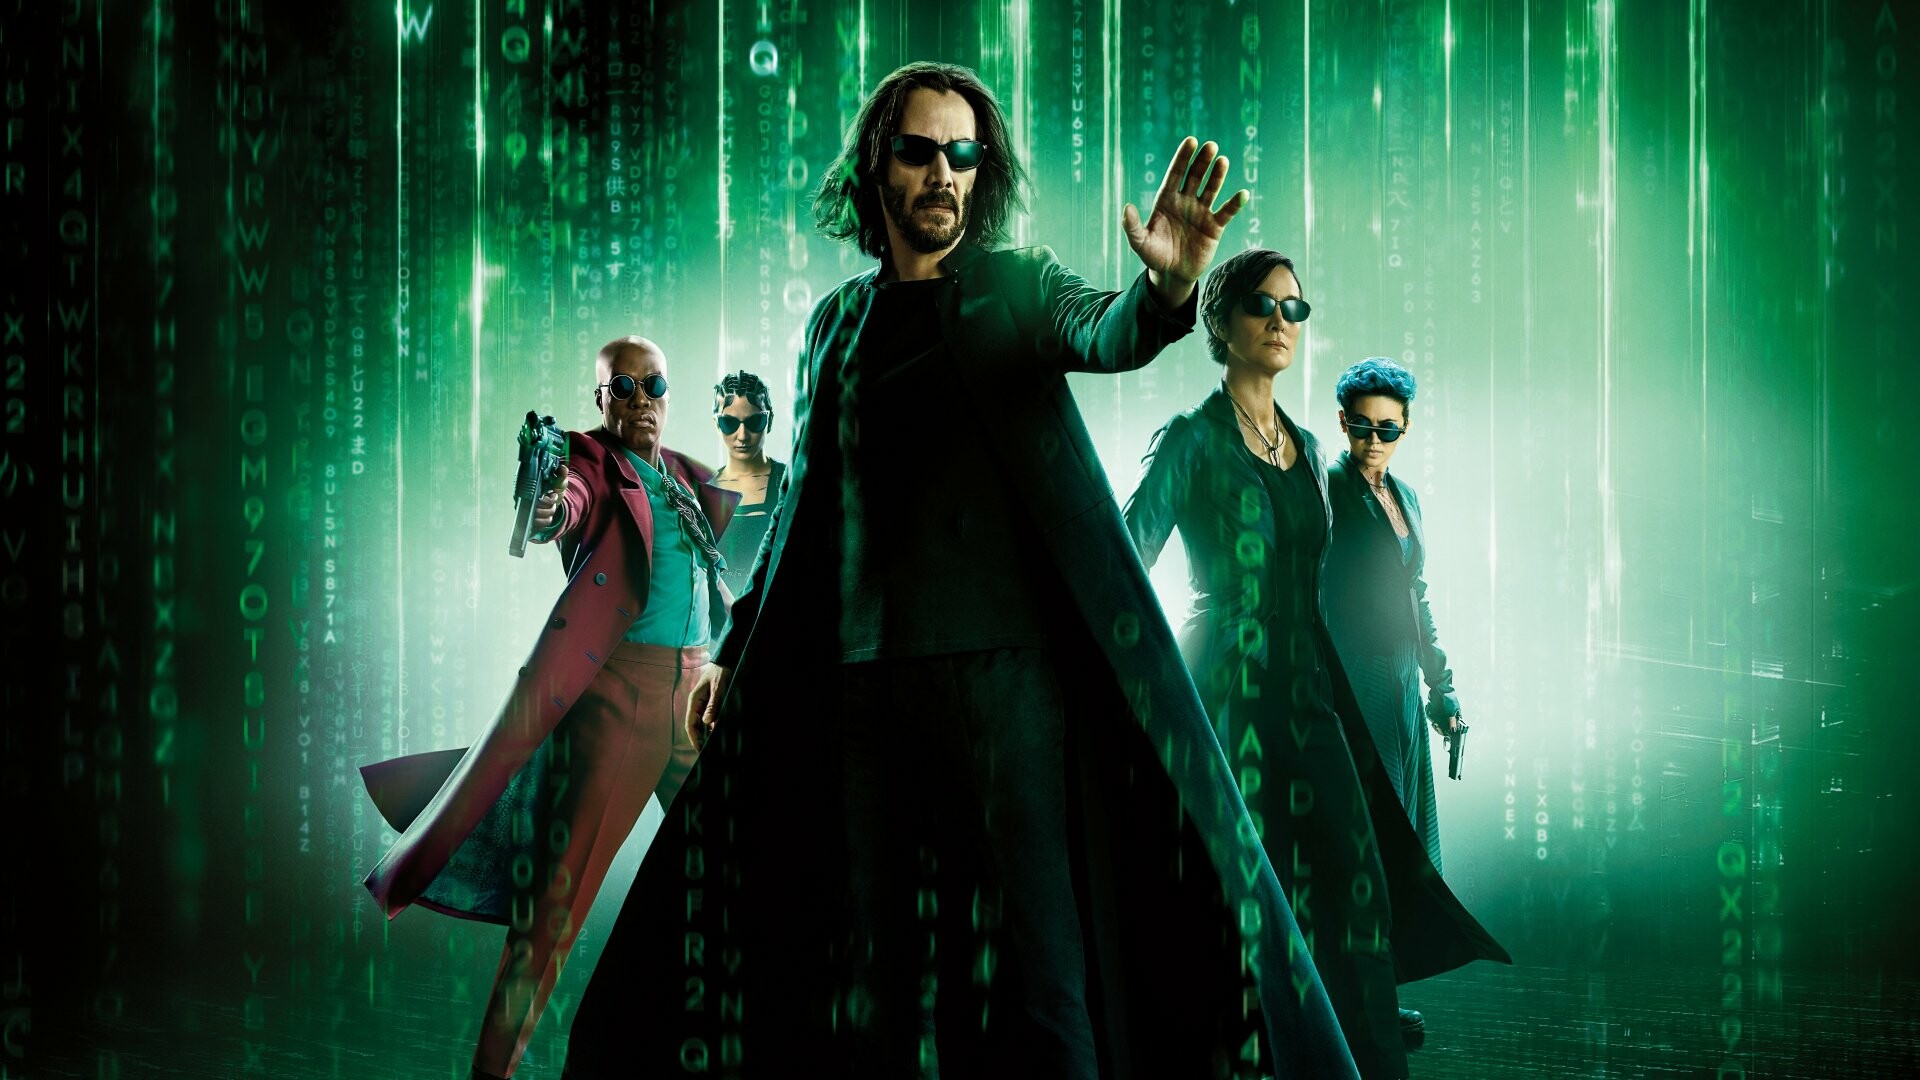 The Matrix Resurrections: Keanu Reeves, Carrie-Anne Moss, and Jada Pinkett Smith reprise their roles from the previous films. 1920x1080 Full HD Background.